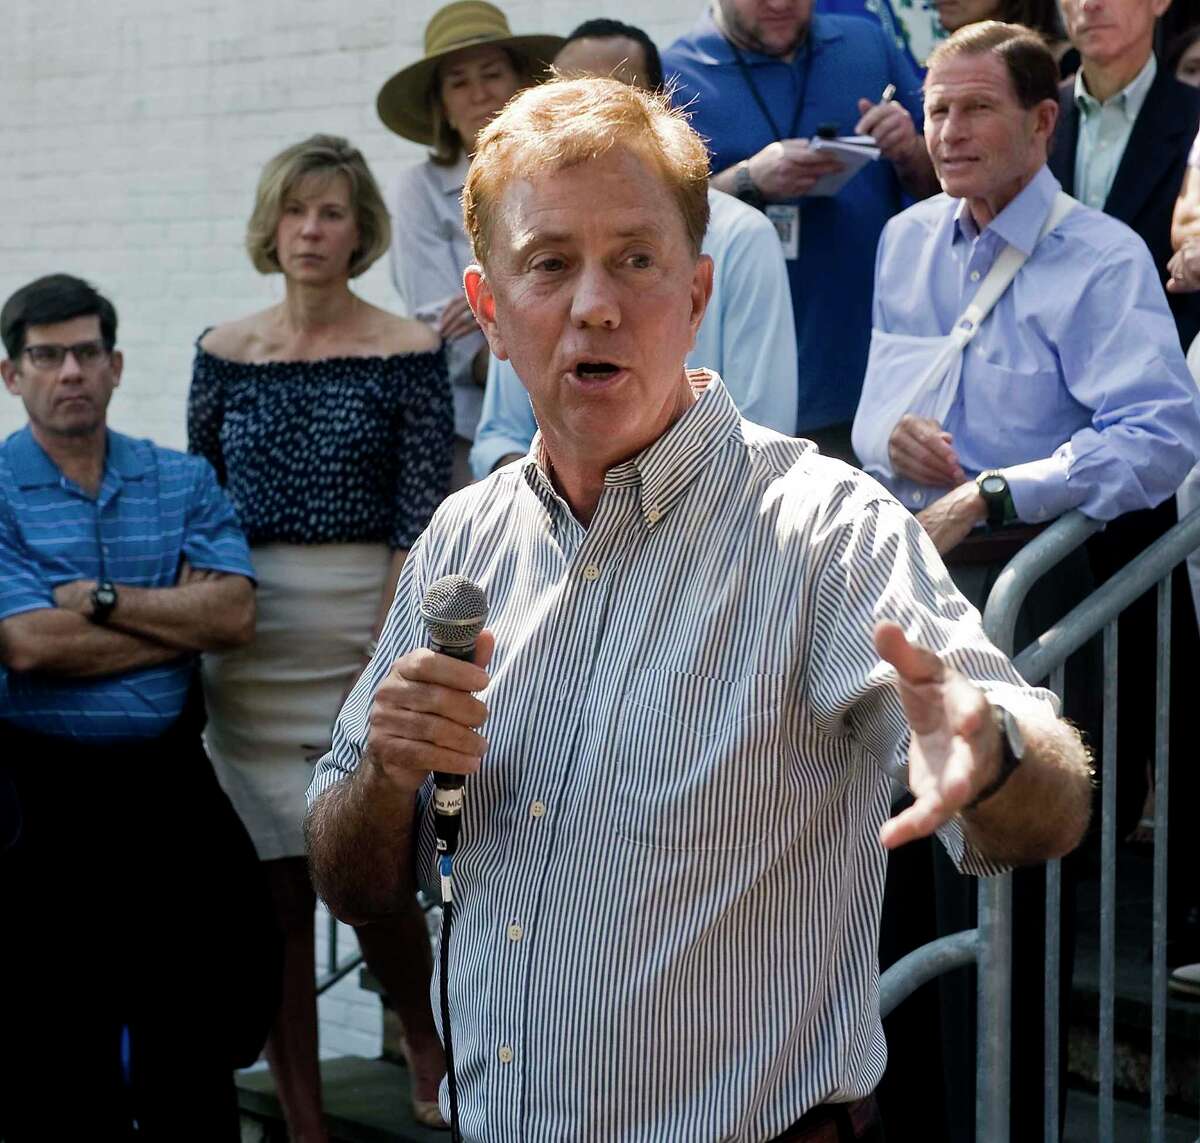 Connecticut Governor Ned Lamont addresses the gathering at the Greenwich Democratic Town Committee's annual picnic at the Greenwich Botanical Center, Sunday, Sept. 15, 2019